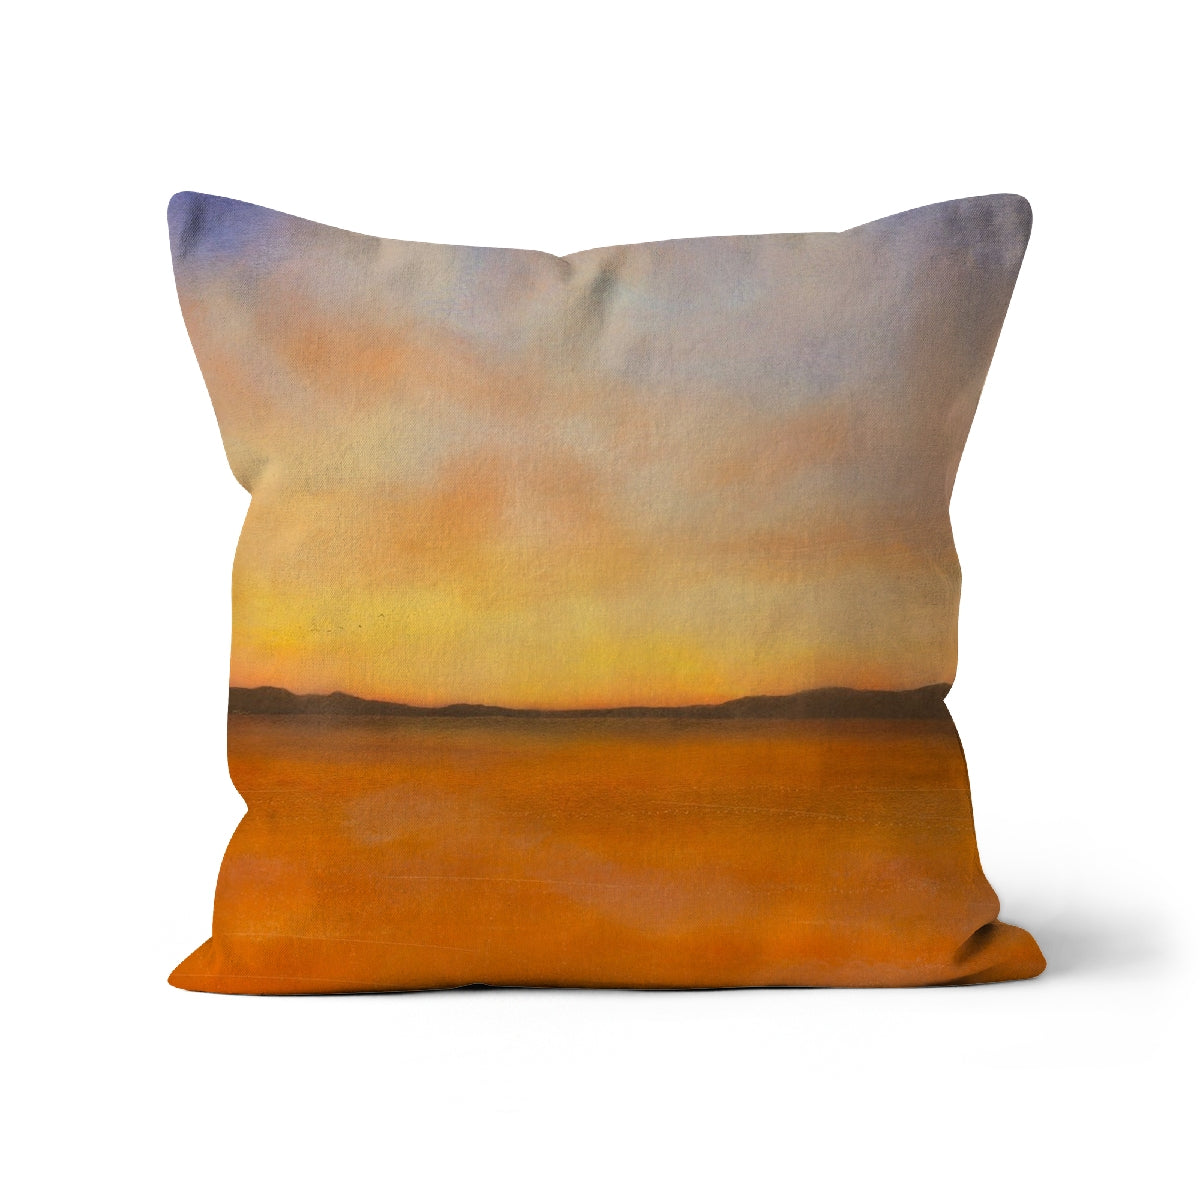 Islay Dawn Art Gifts Cushion-Cushions-Hebridean Islands Art Gallery-Faux Suede-24"x24"-Paintings, Prints, Homeware, Art Gifts From Scotland By Scottish Artist Kevin Hunter